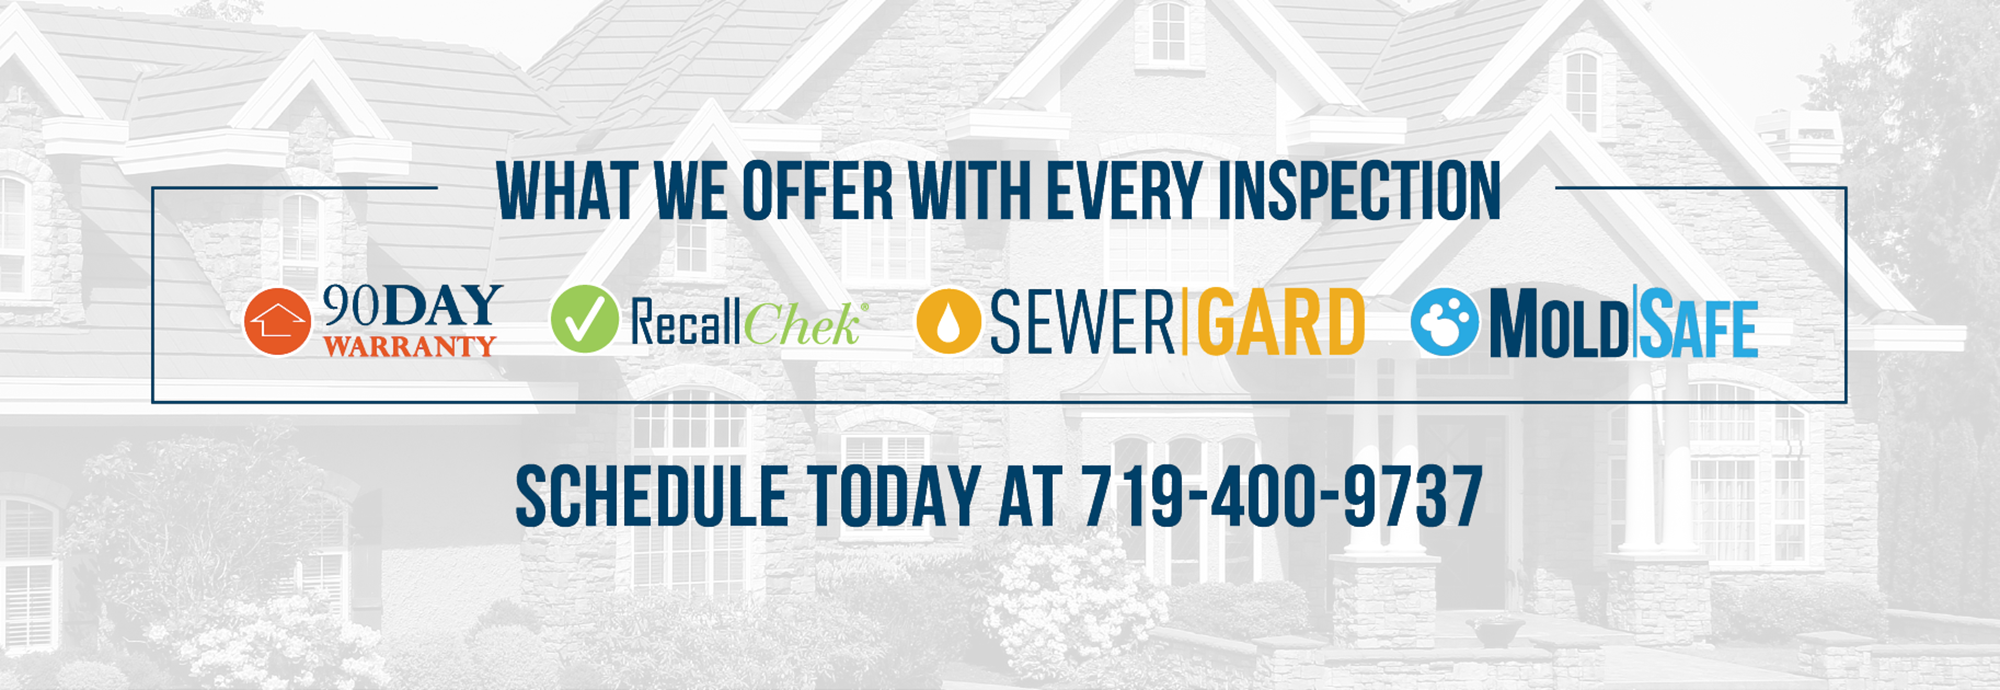 What we offer with every inspection: 90-day warranty, recall check, sewer guard, mold safe. Schedule today at 719-400-9737.